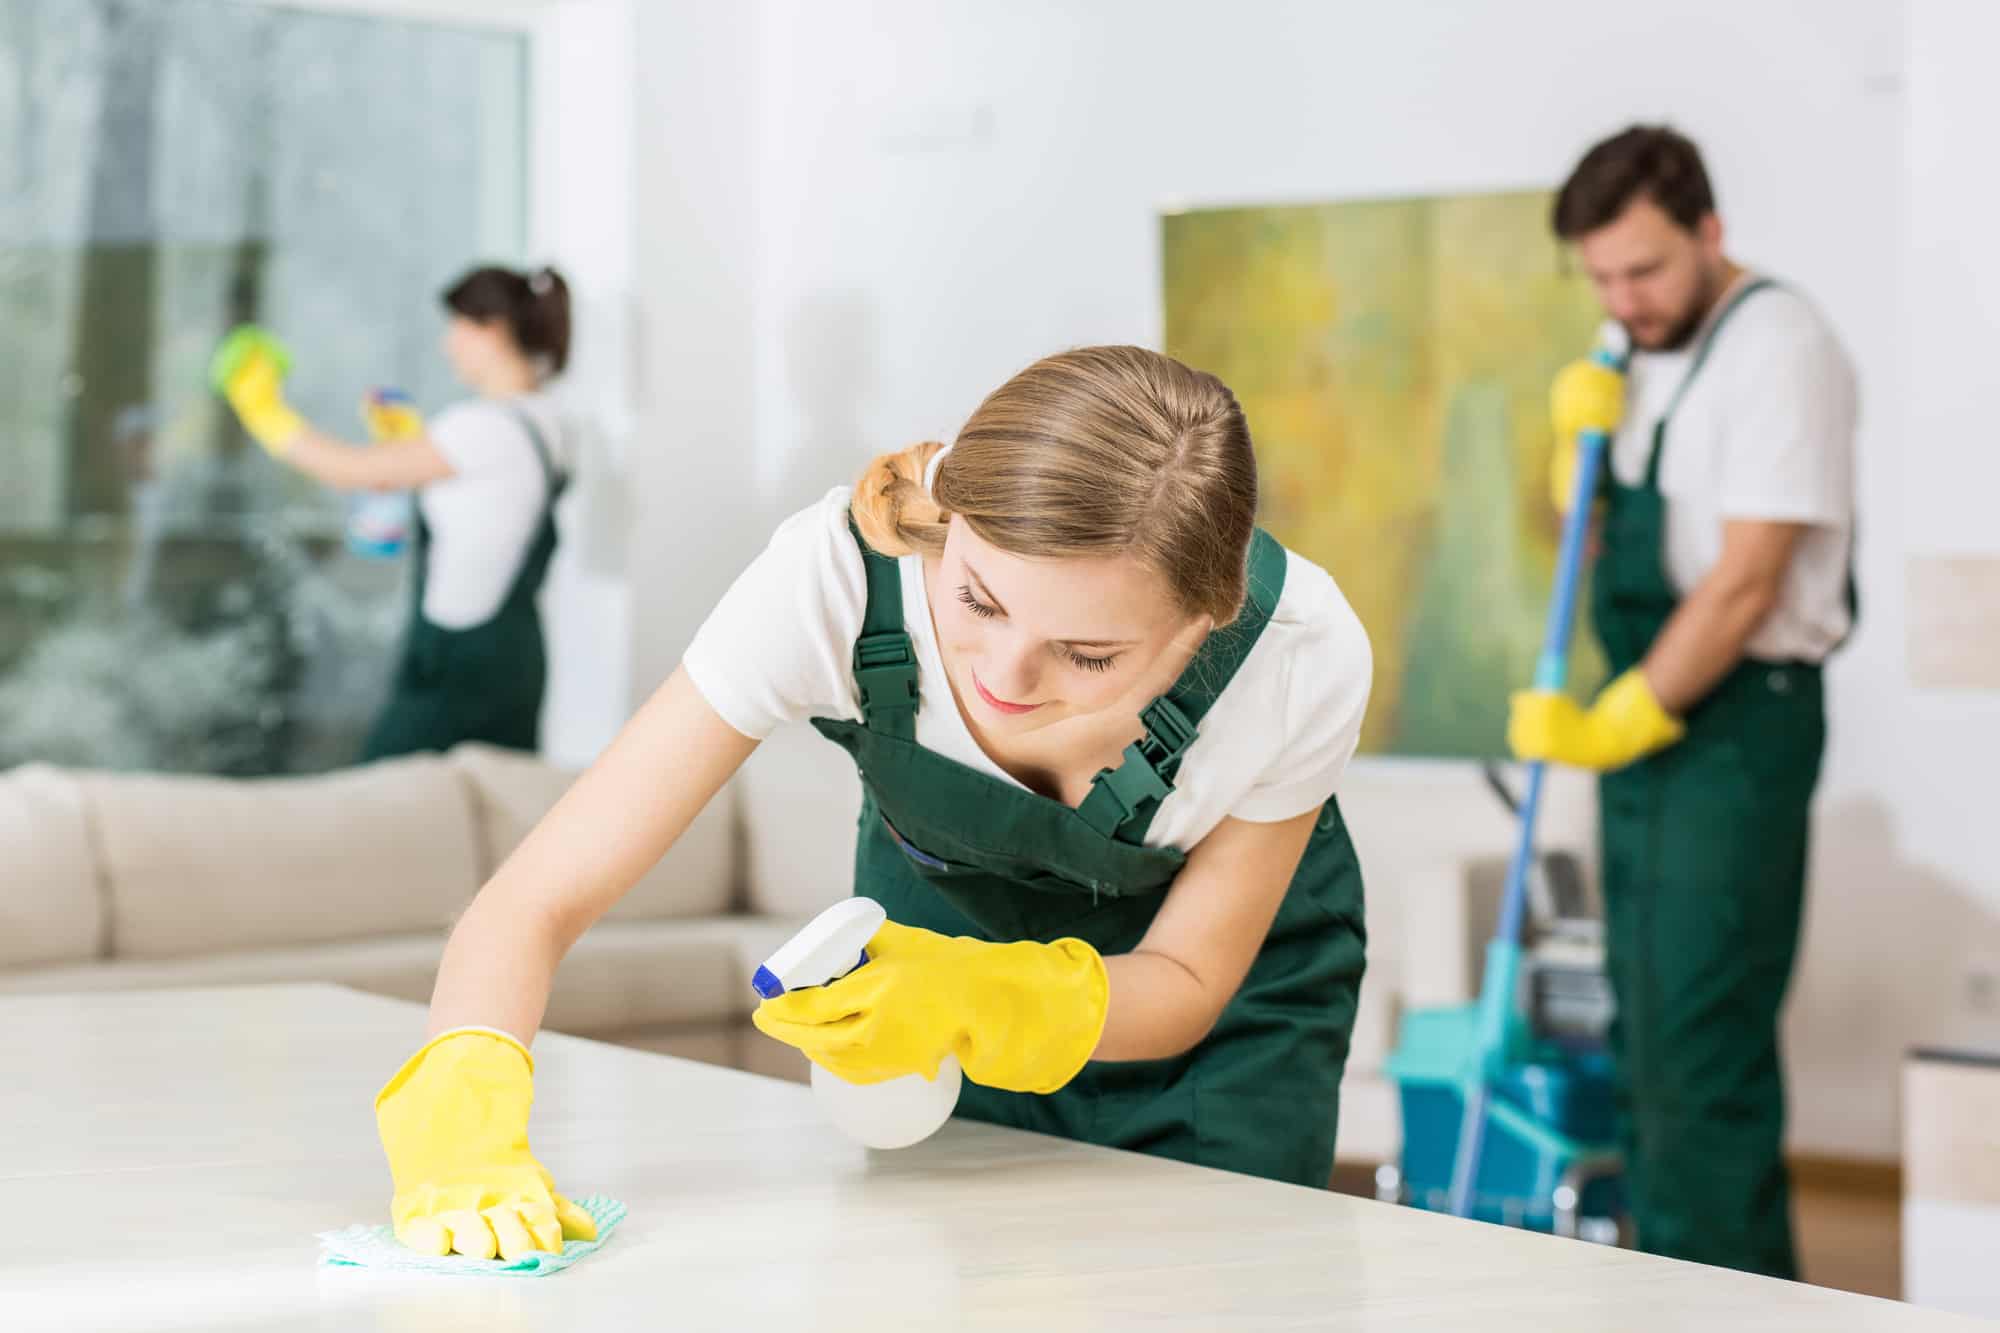 Young girl working as a professional cleaner and wiping down a table.